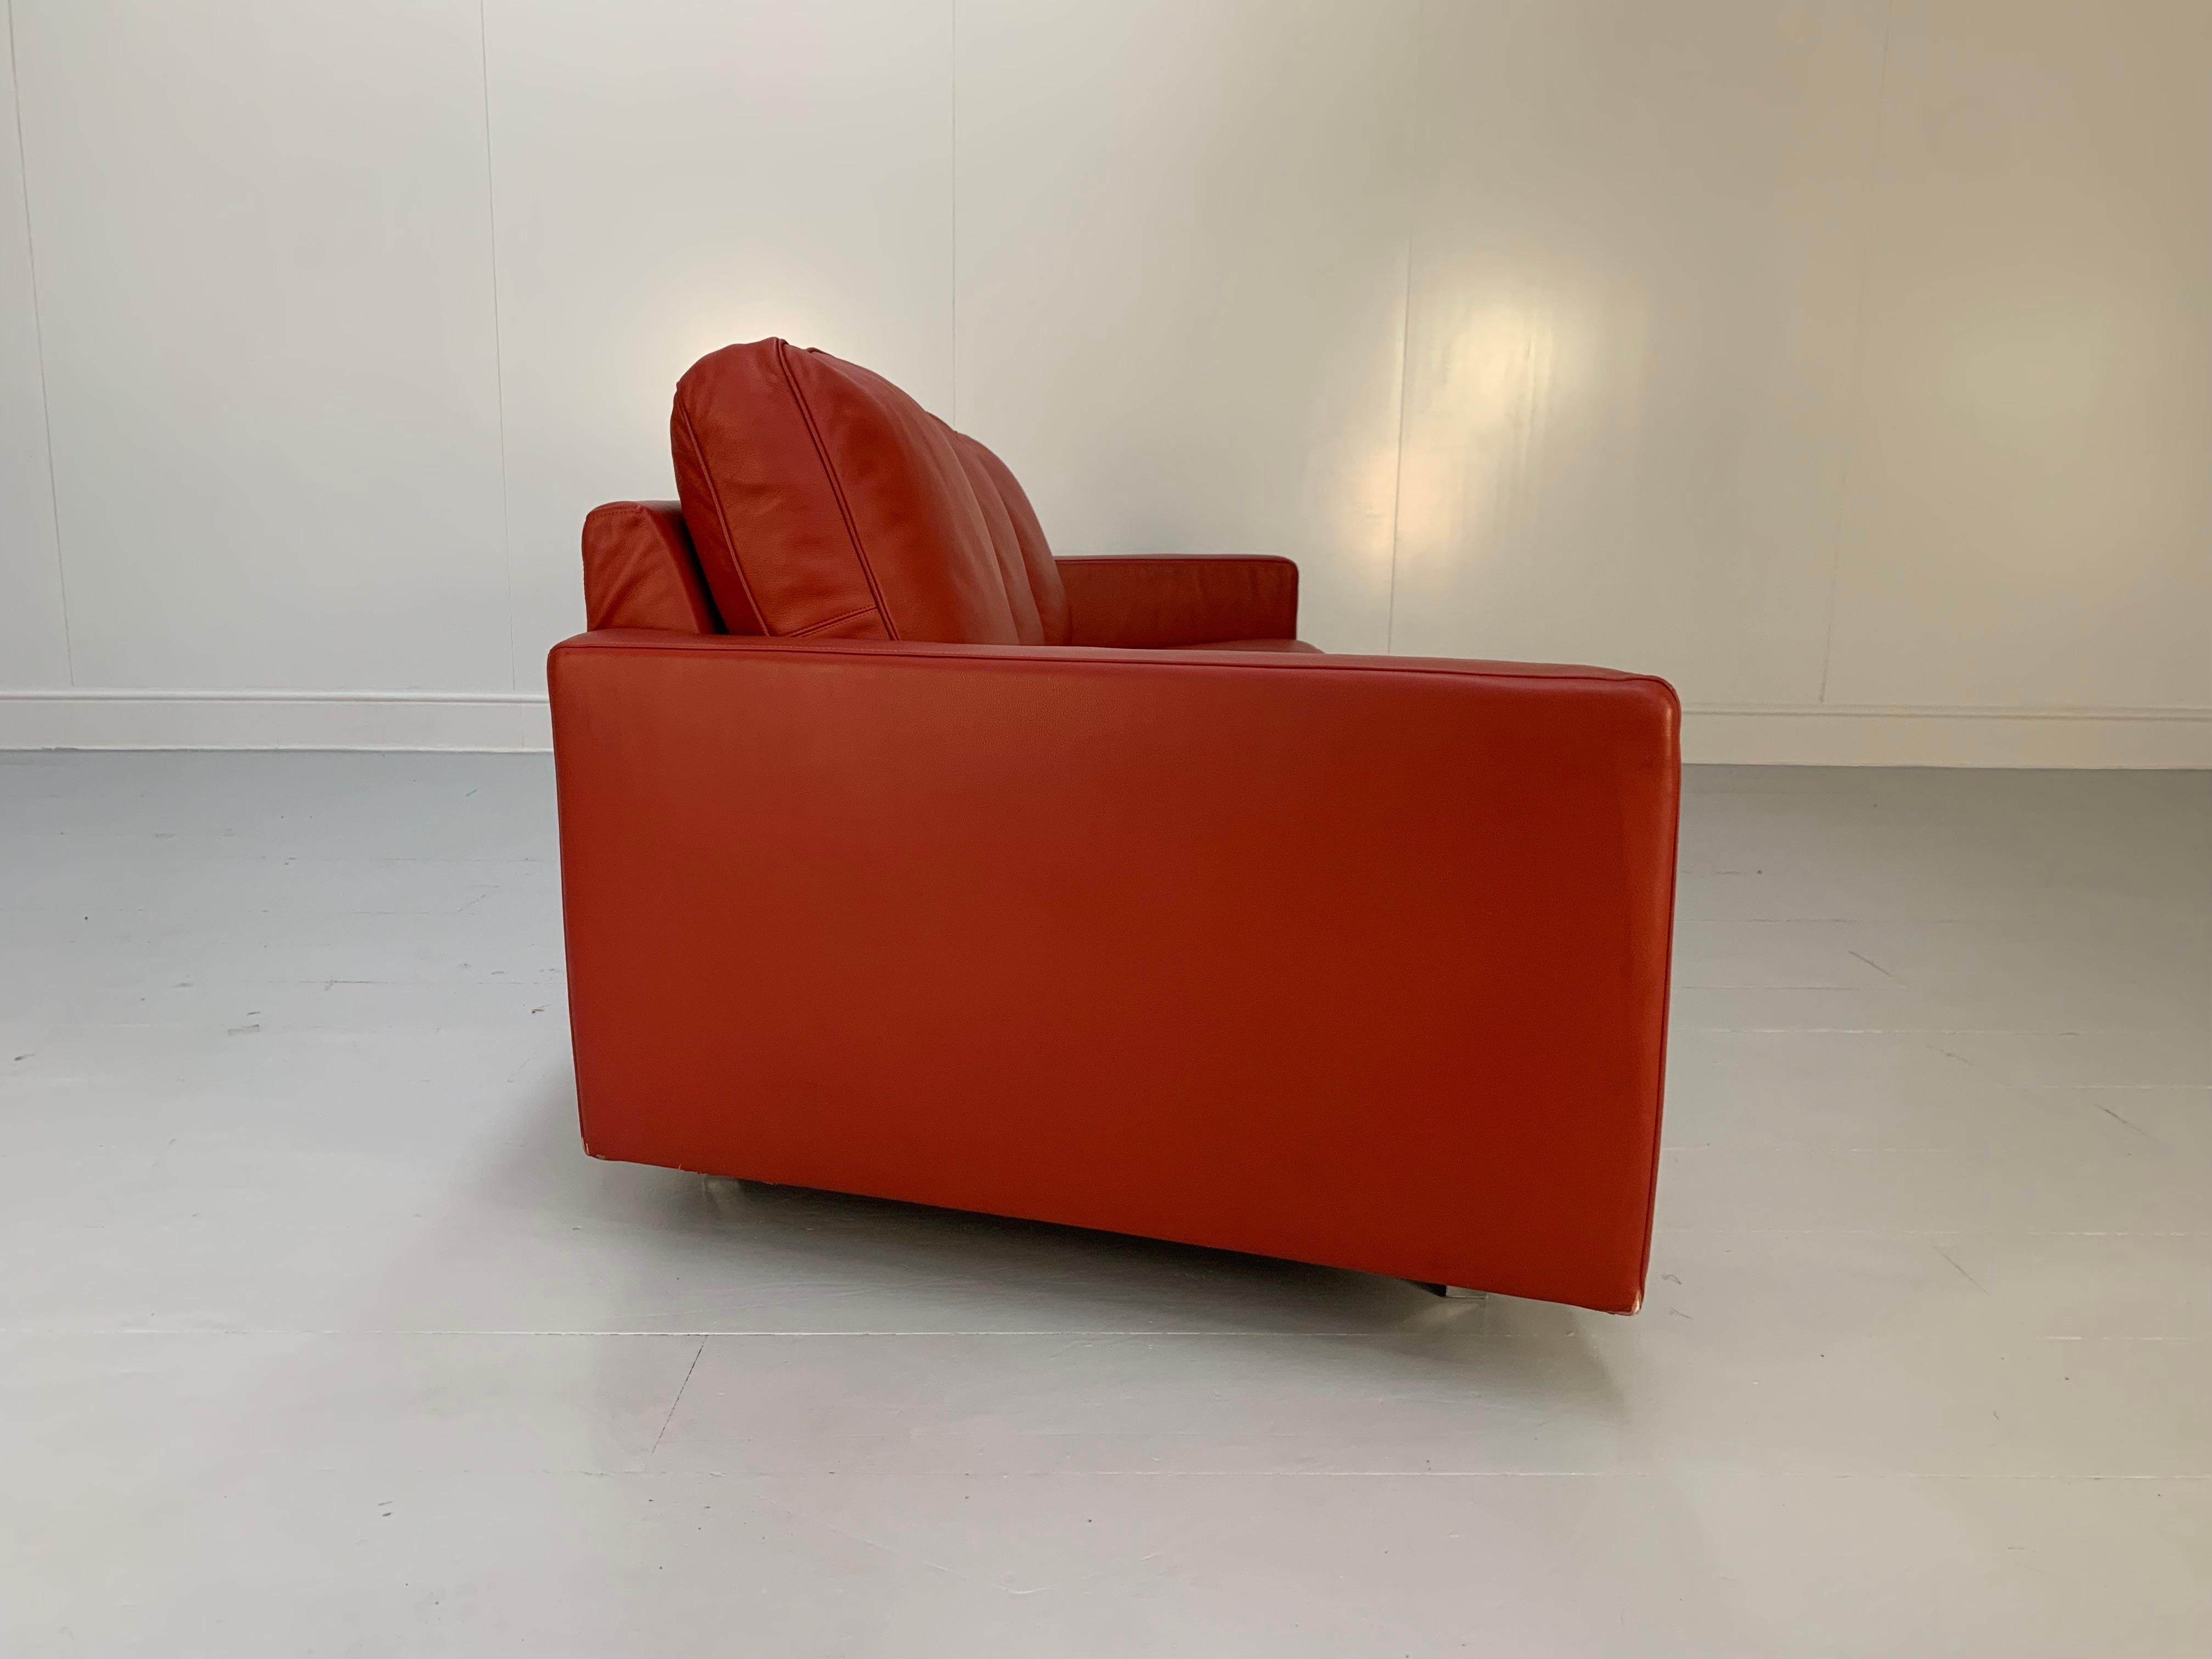 Moroso “Hyde Park” Sofa & 2 Armchair Suite, in Red “Pelle” Leather In Good Condition For Sale In Barrowford, GB